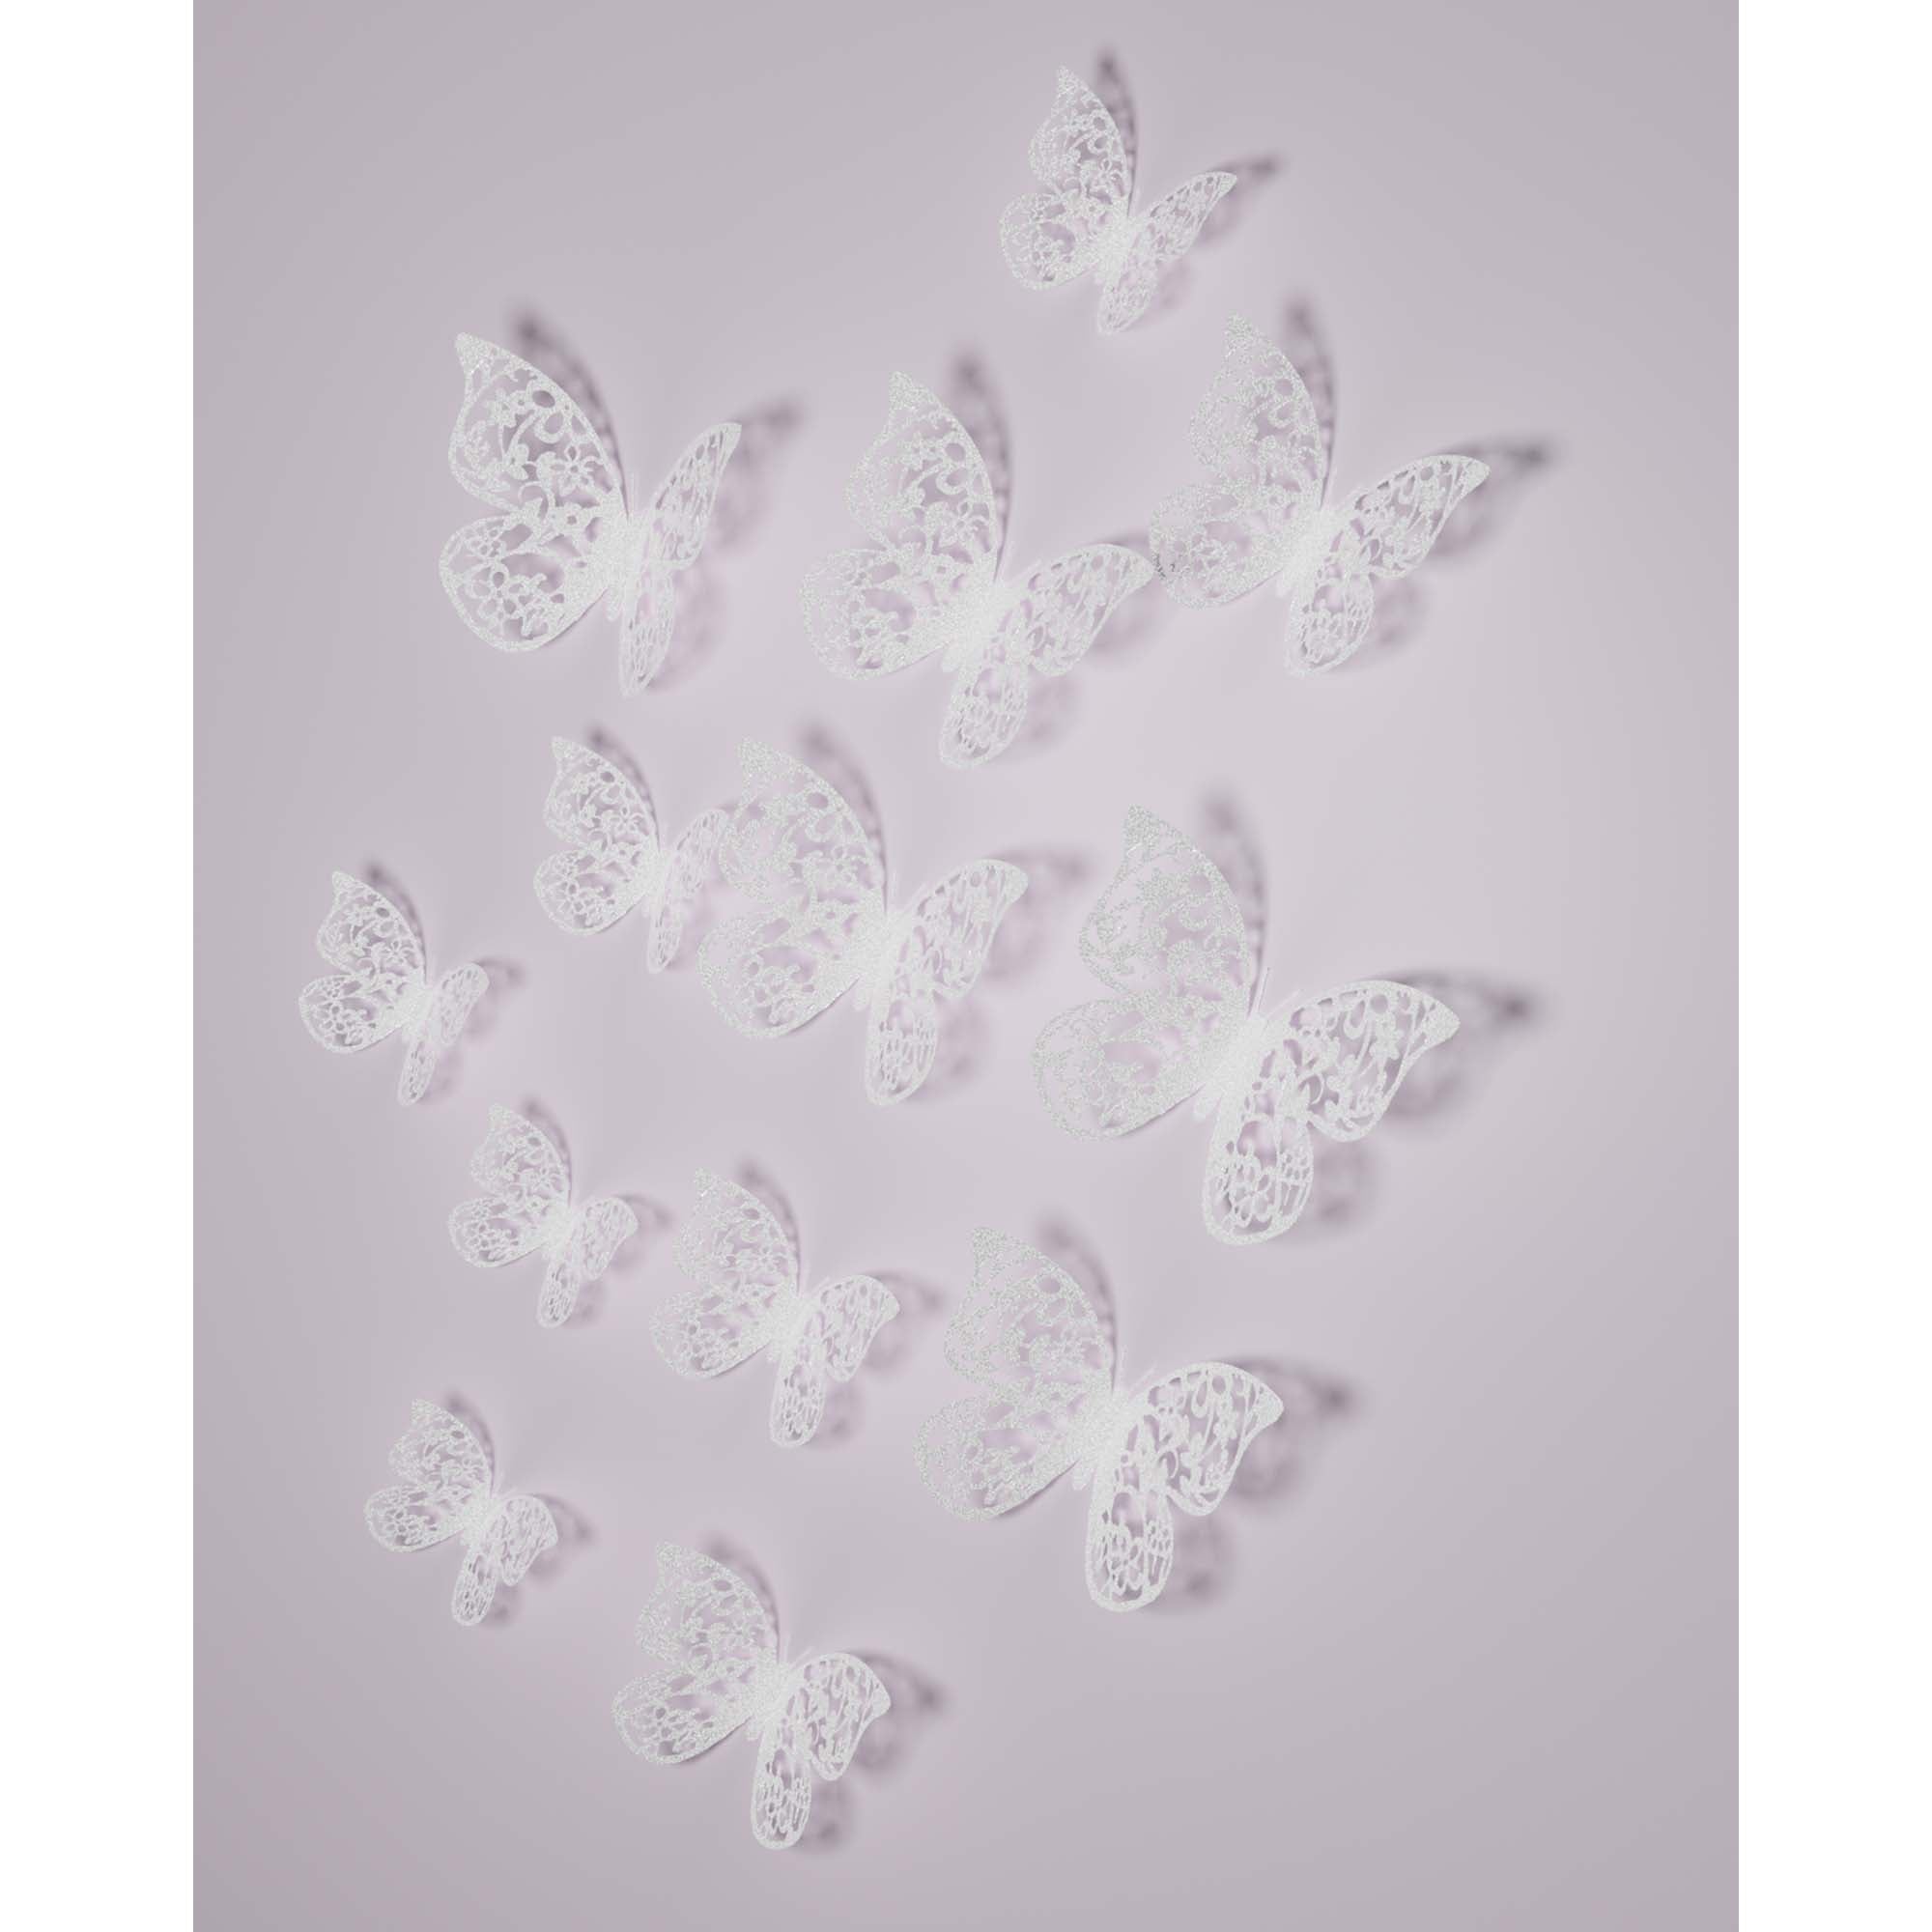 White 3D Butterfly Decorations, 12 Count